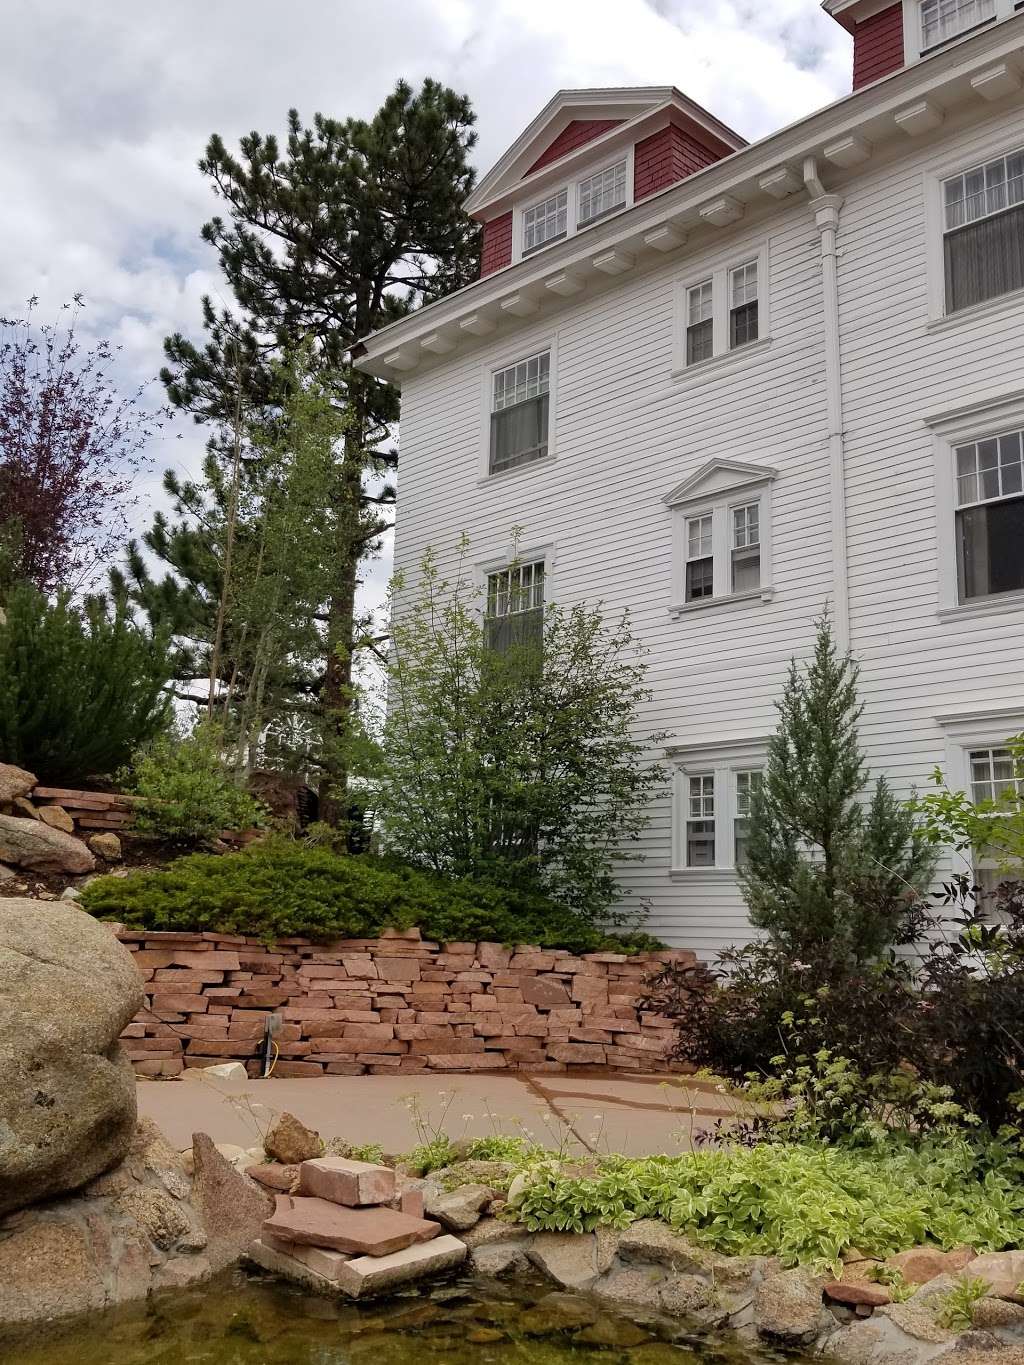 Chrysalis At the Stanley Hotel | 333 W W Wonderview Ave, Estes Park, CO 80517 | Phone: (970) 577-4013